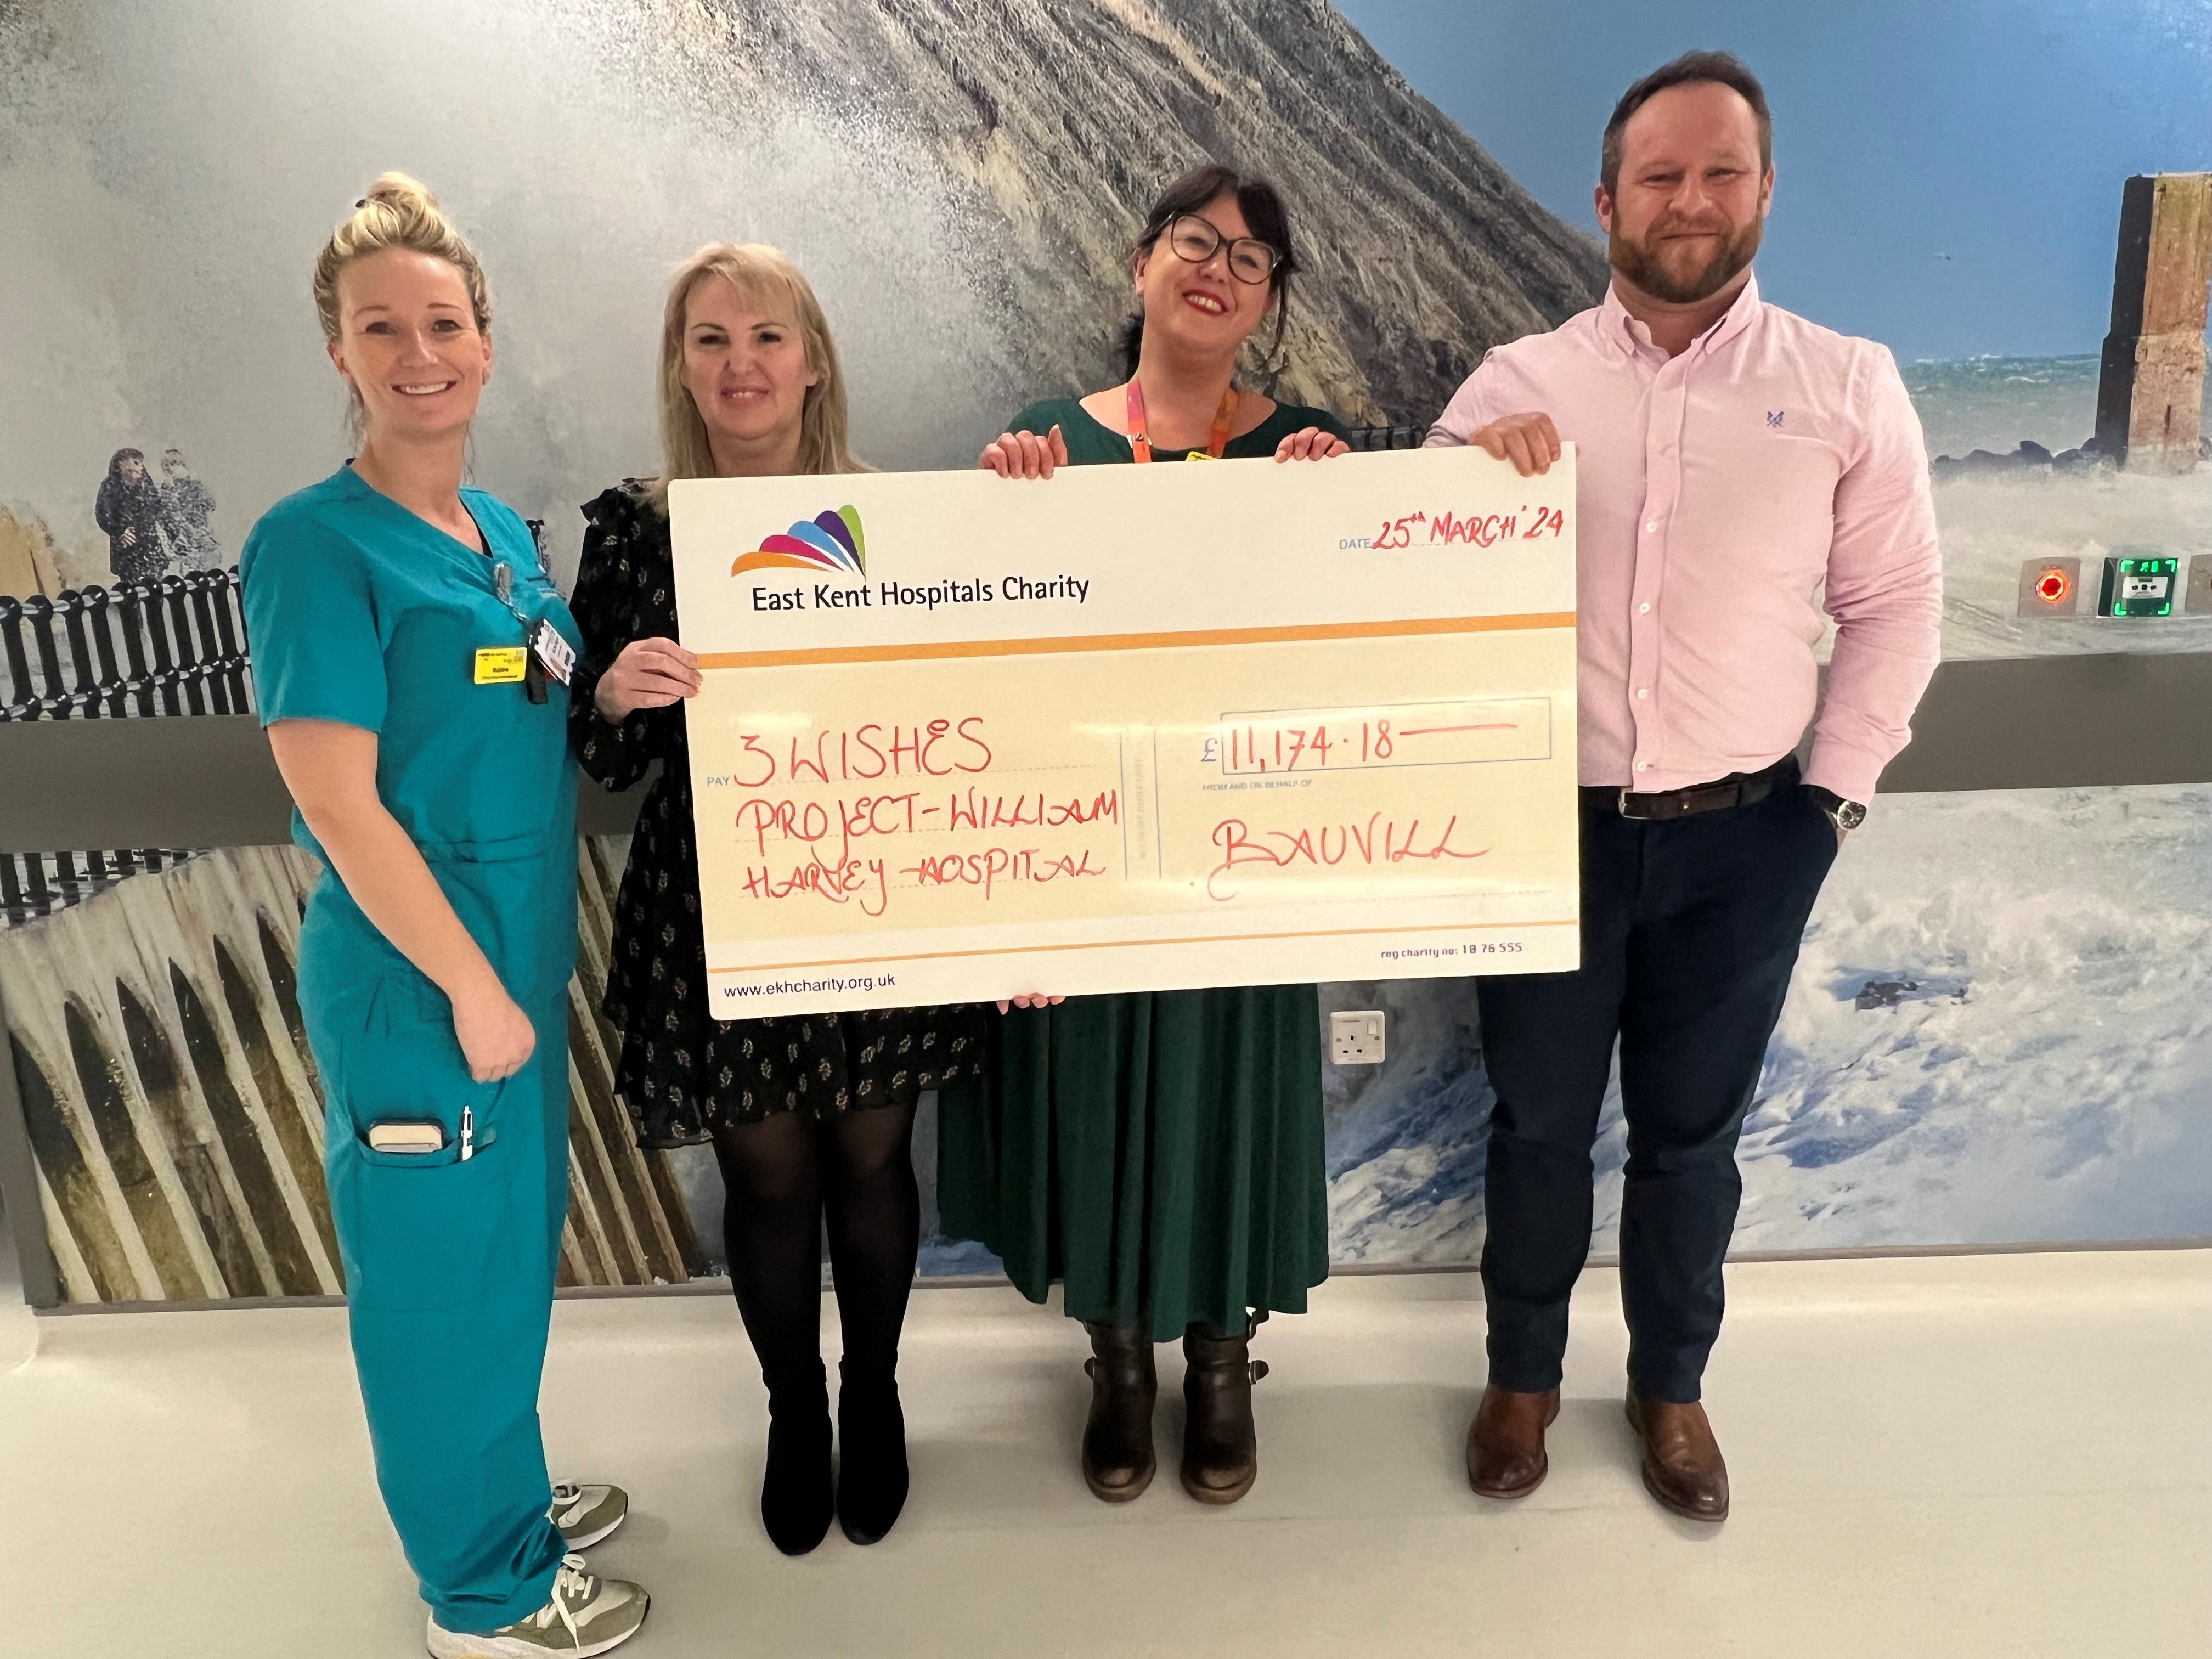 Critical care staff, Dee from the charity and Matt from Bauvill holding a big cheque for the 3 wishes project with £11,174.18 on it